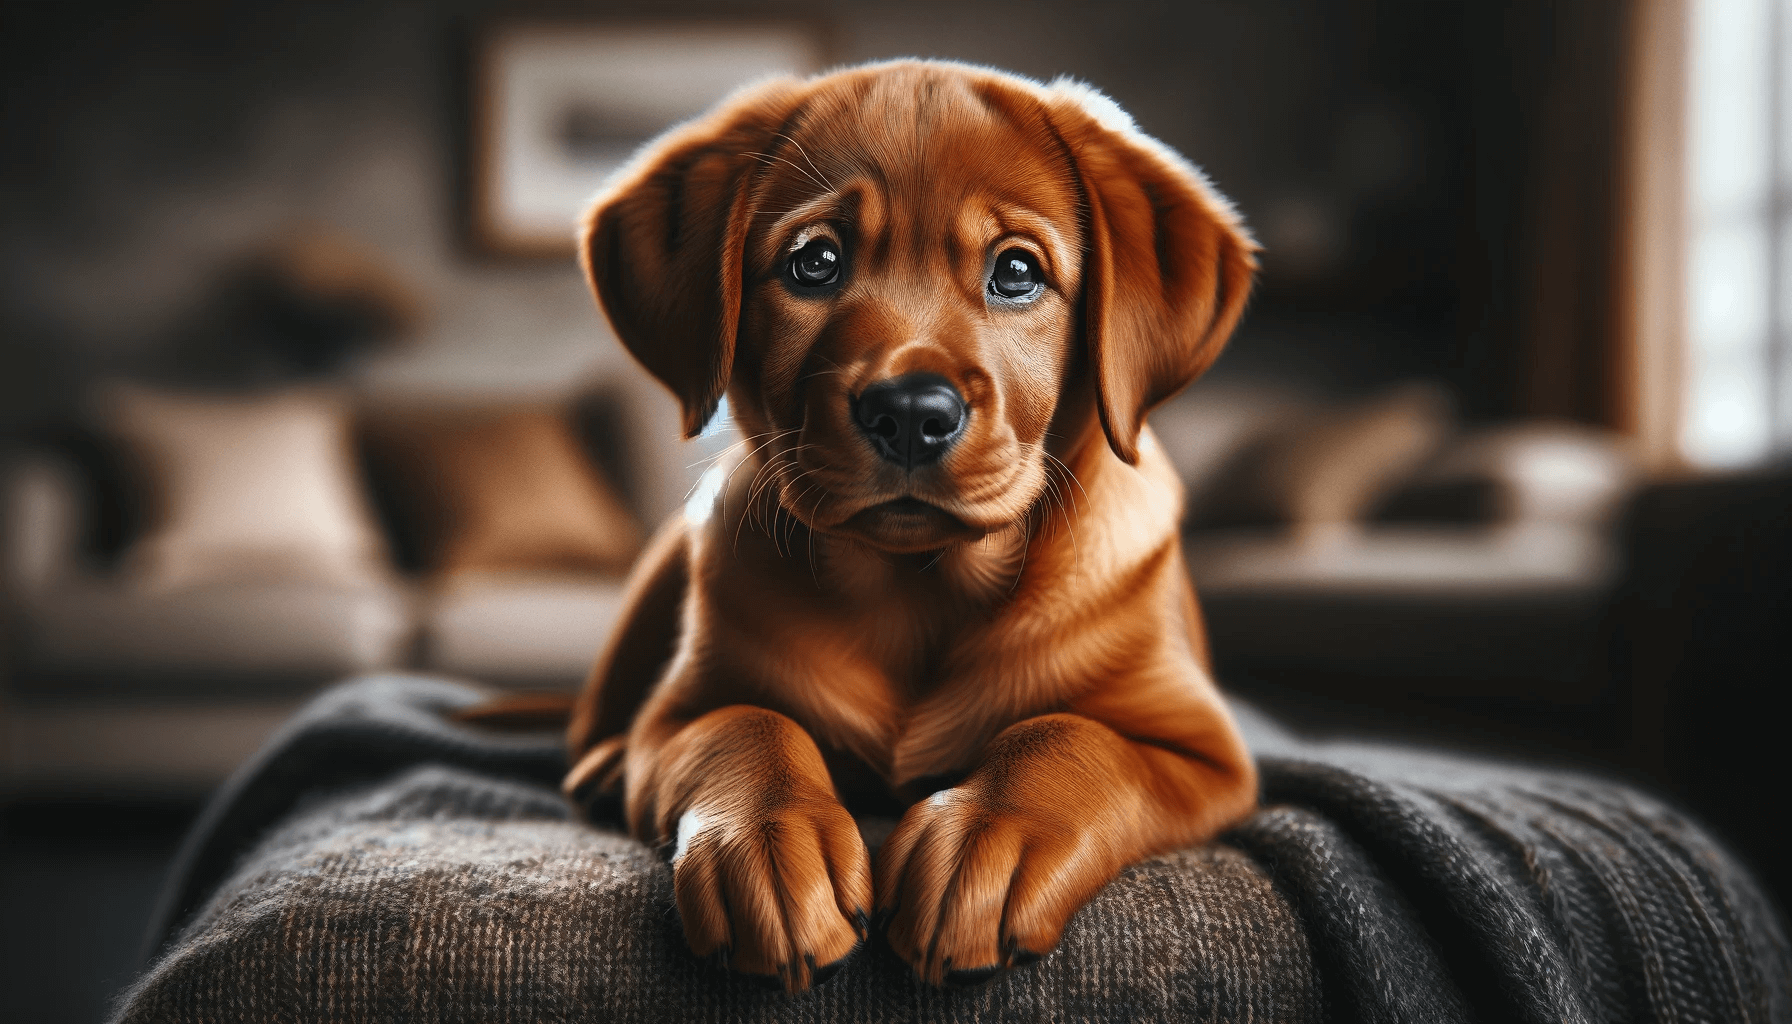 Red Fox Labrador retriever puppy with a glossy coat sitting comfortably on a soft dark-colored blanket